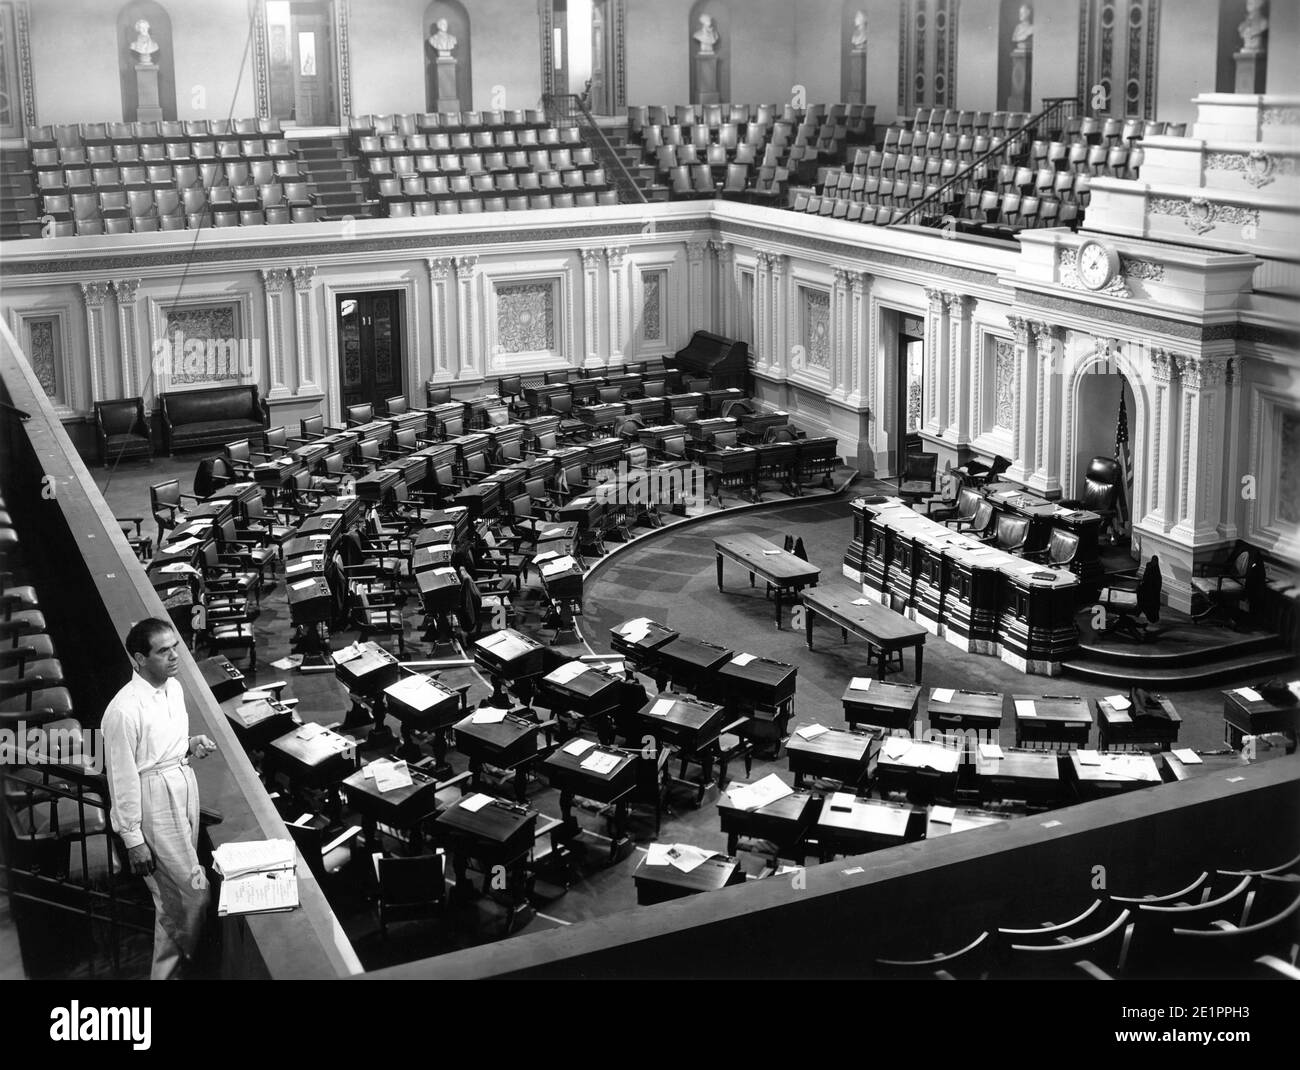 Director FRANK CAPRA on set candid on the empty US Senate Chamber Set built at Columbia Studios in Hollywood for filming of MR. SMITH GOES TO WASHINGTON 1939 director FRANK CAPRA story Lewis R. Foster screenplay Sidney Buchman art direction Lionel Banks Columbia Pictures Stock Photo